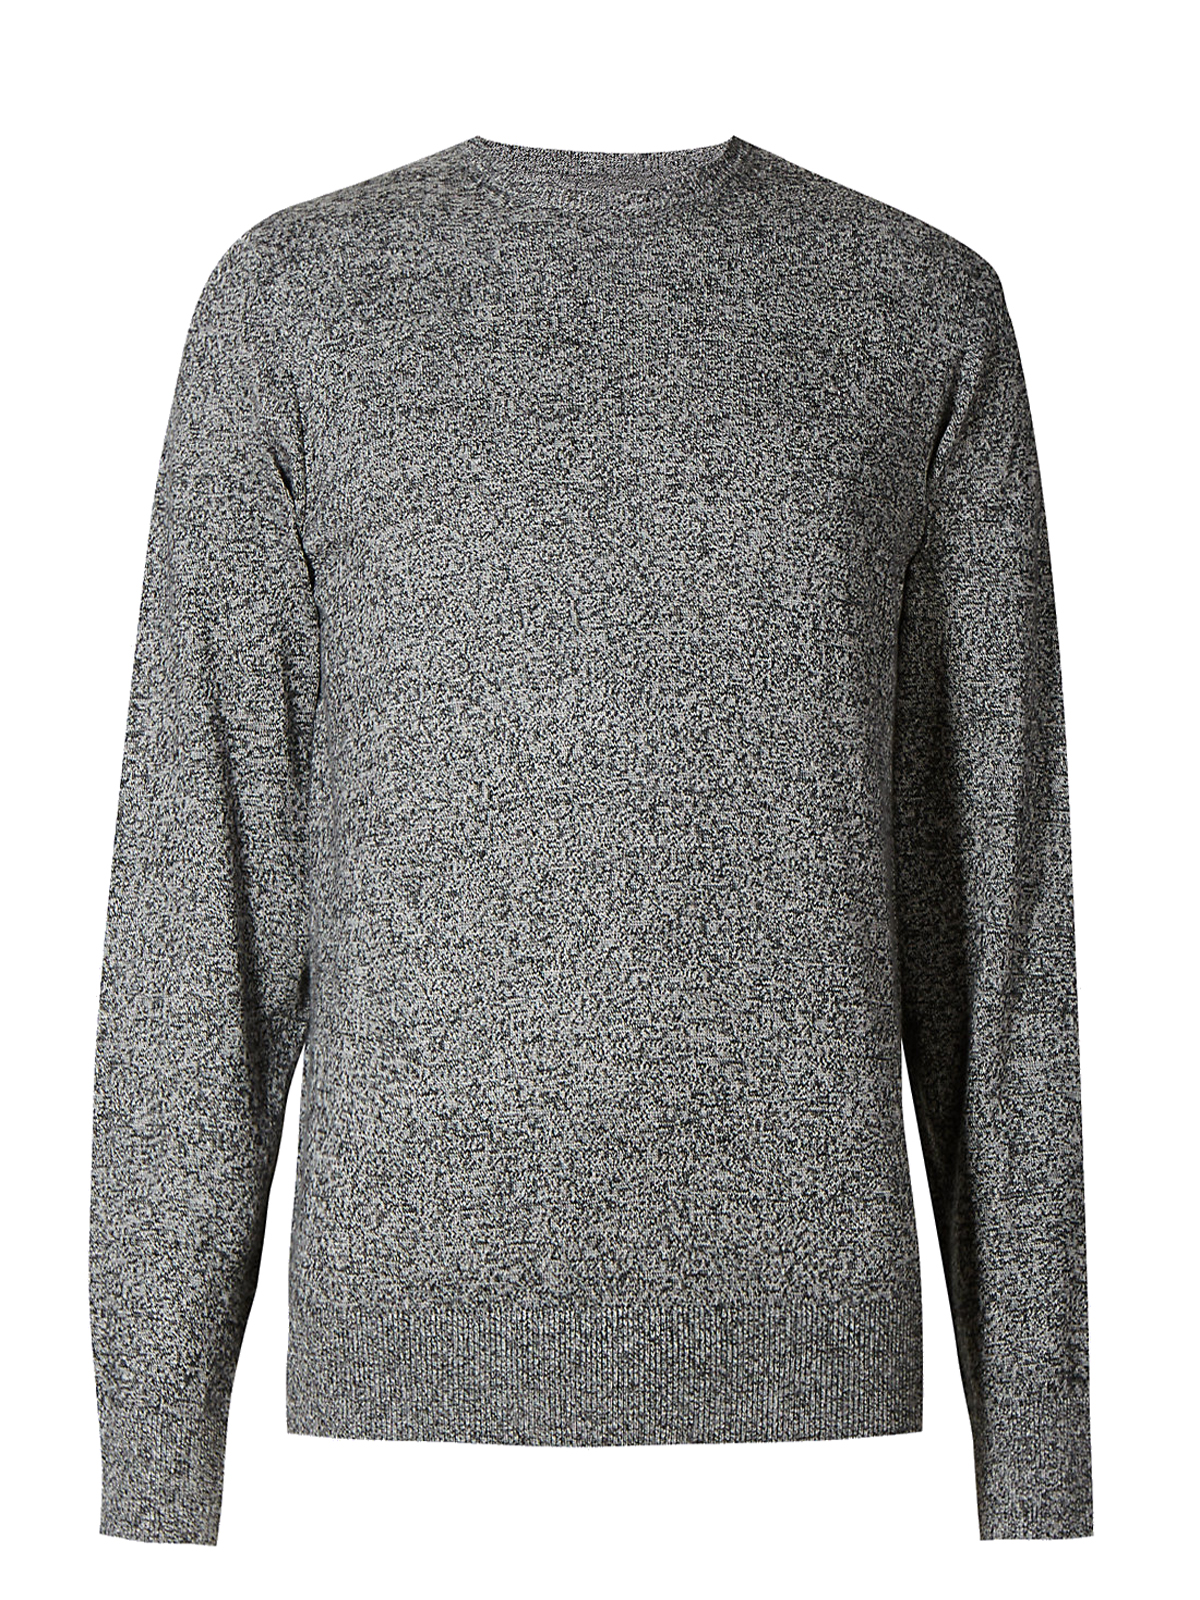 Marks and Spencer - - M&5 ASSORTED Mens Knitted Jumpers - Size Small to ...